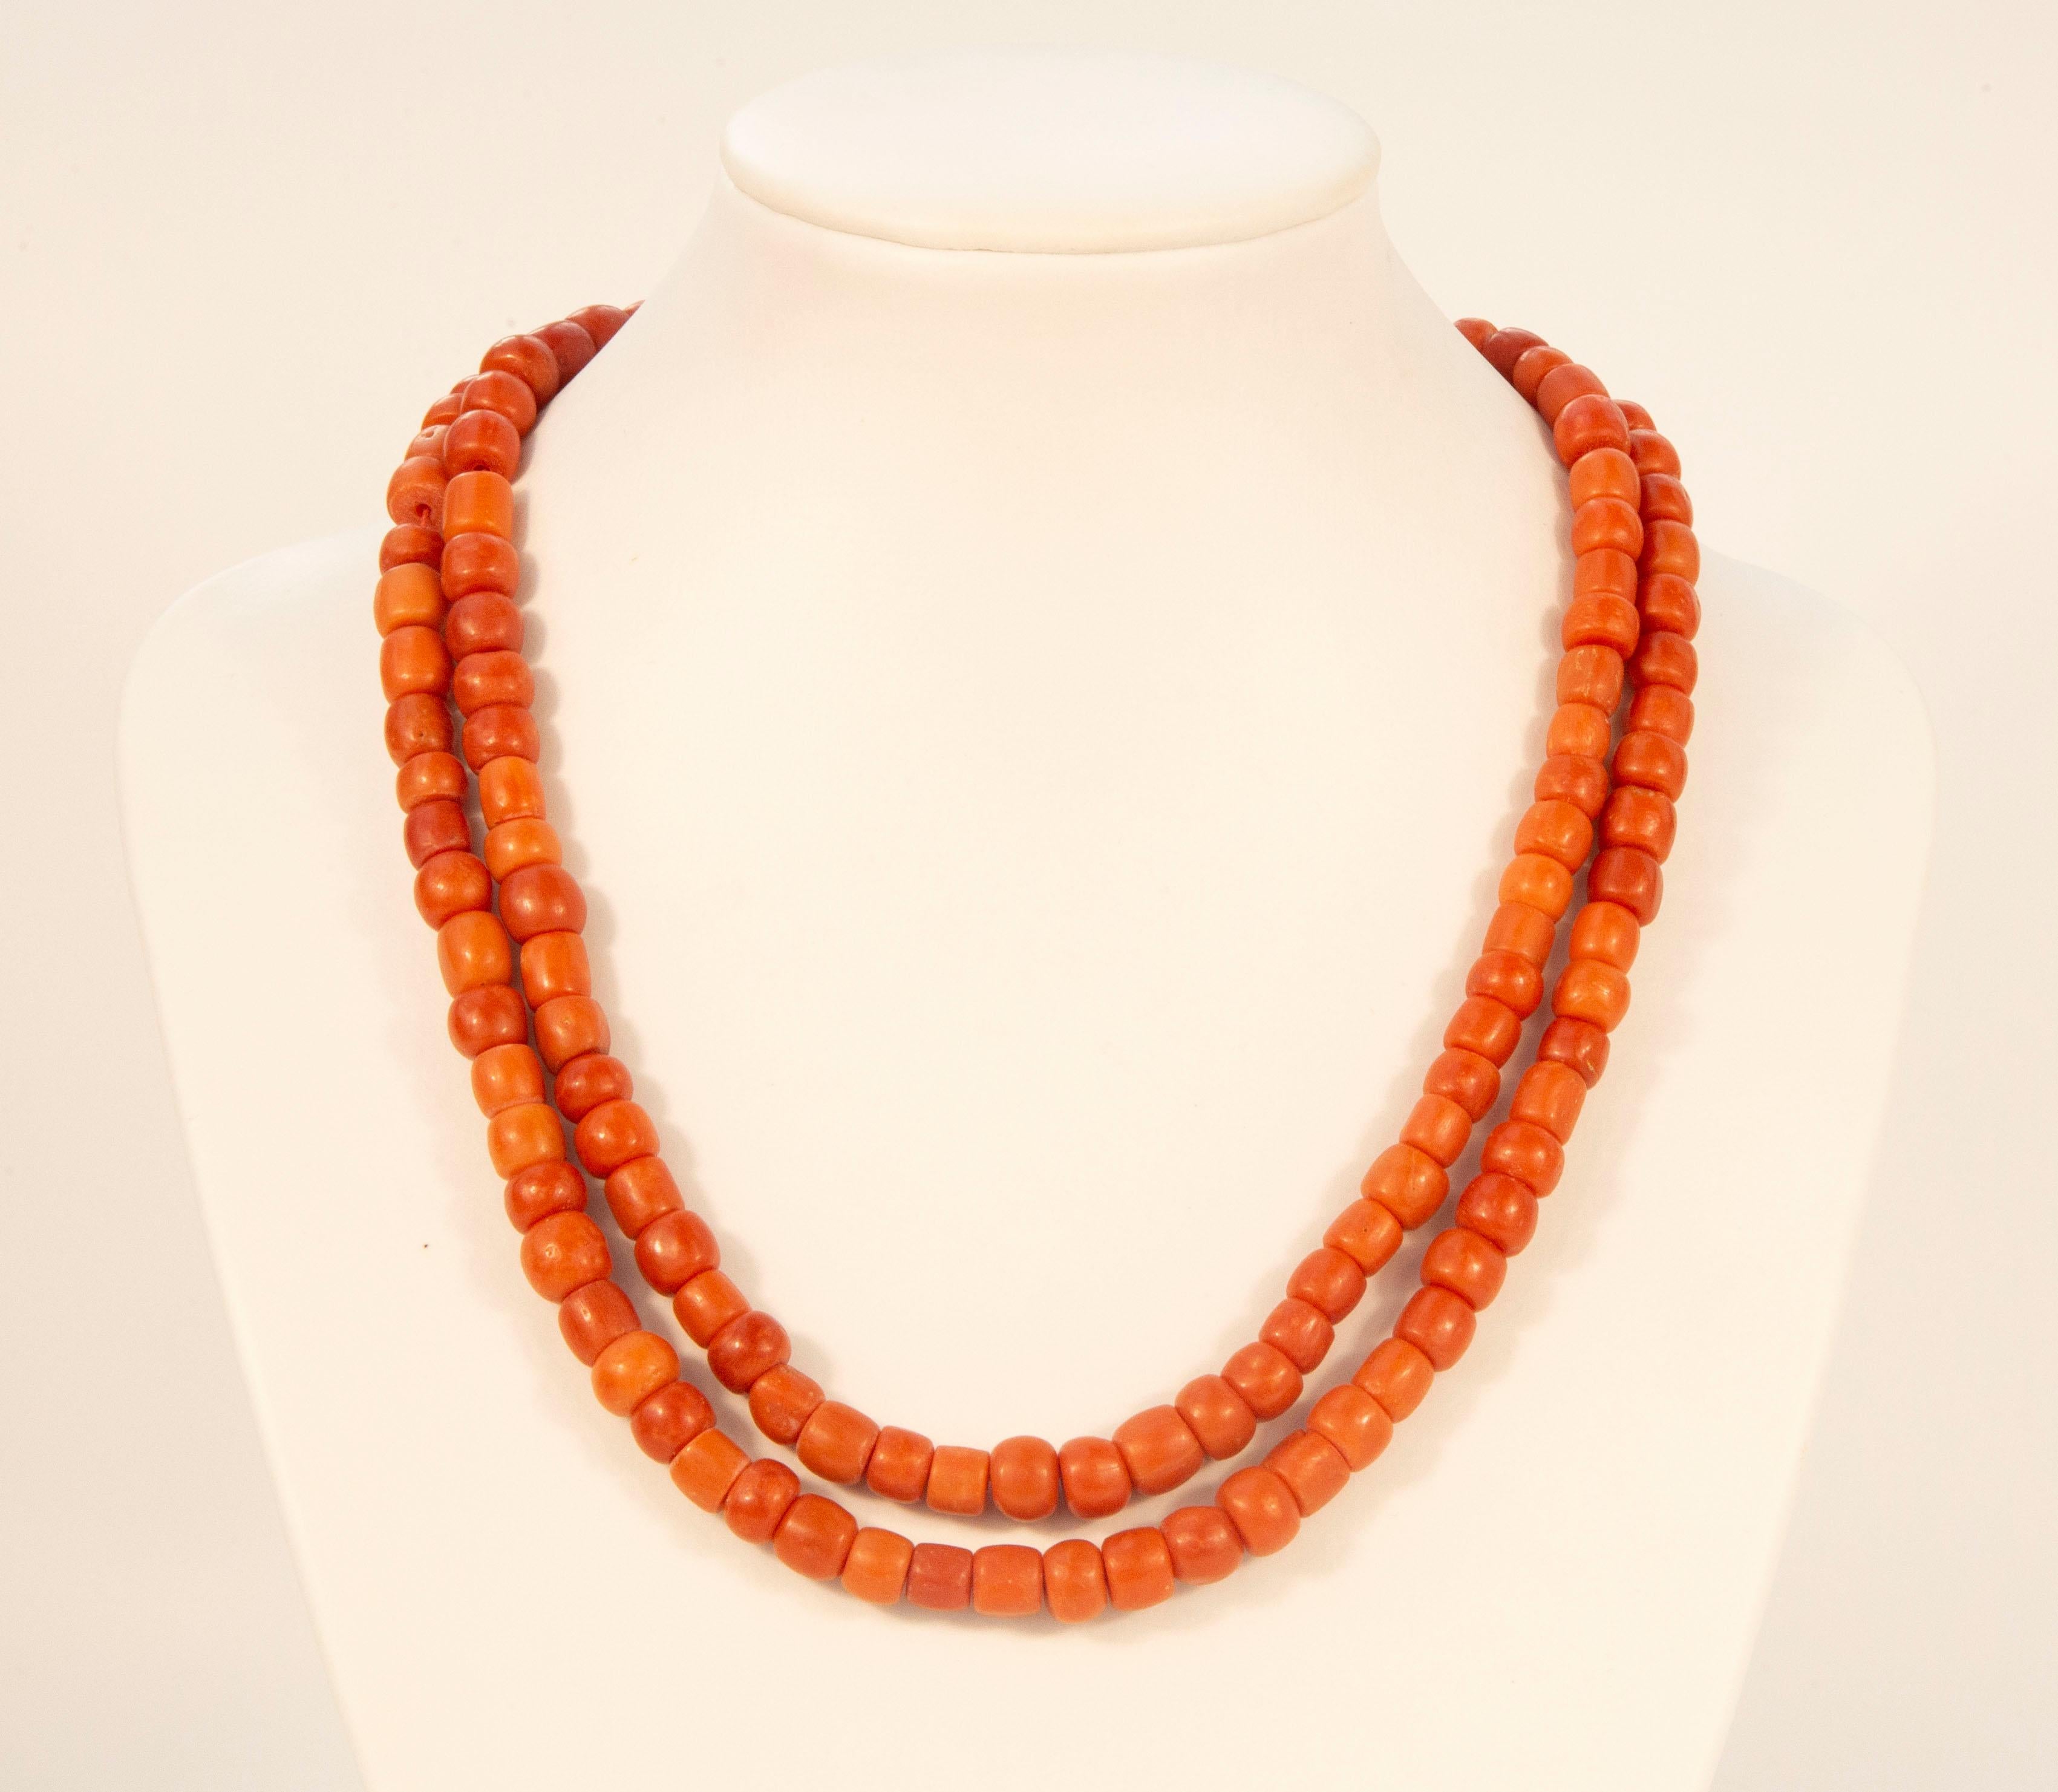 An antique two strand red coral necklace with a 14 karat rose gold barrel lock and a safety lock chain. The necklace was made at the beginning of the 20th century in the Netherlands, and it is marked with an oak leaf that is an antique Dutch mark